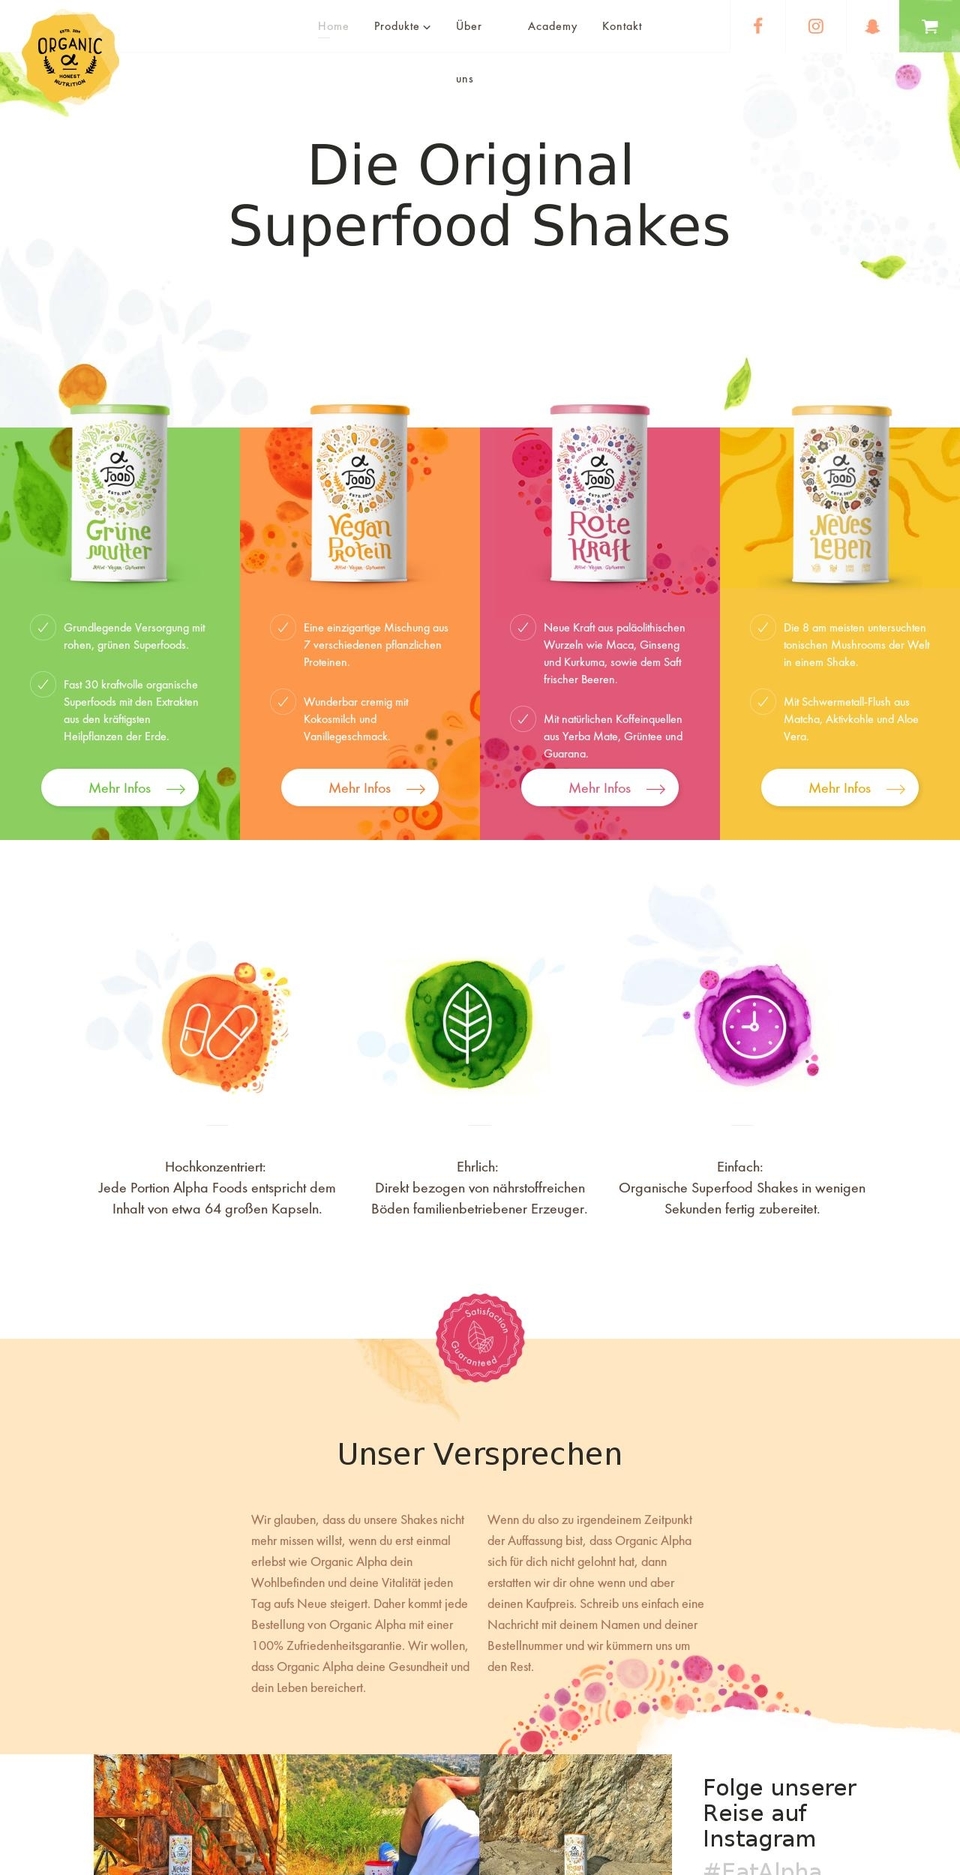 Alpha Foods  Github connected Shopify theme site example organicalpha.de